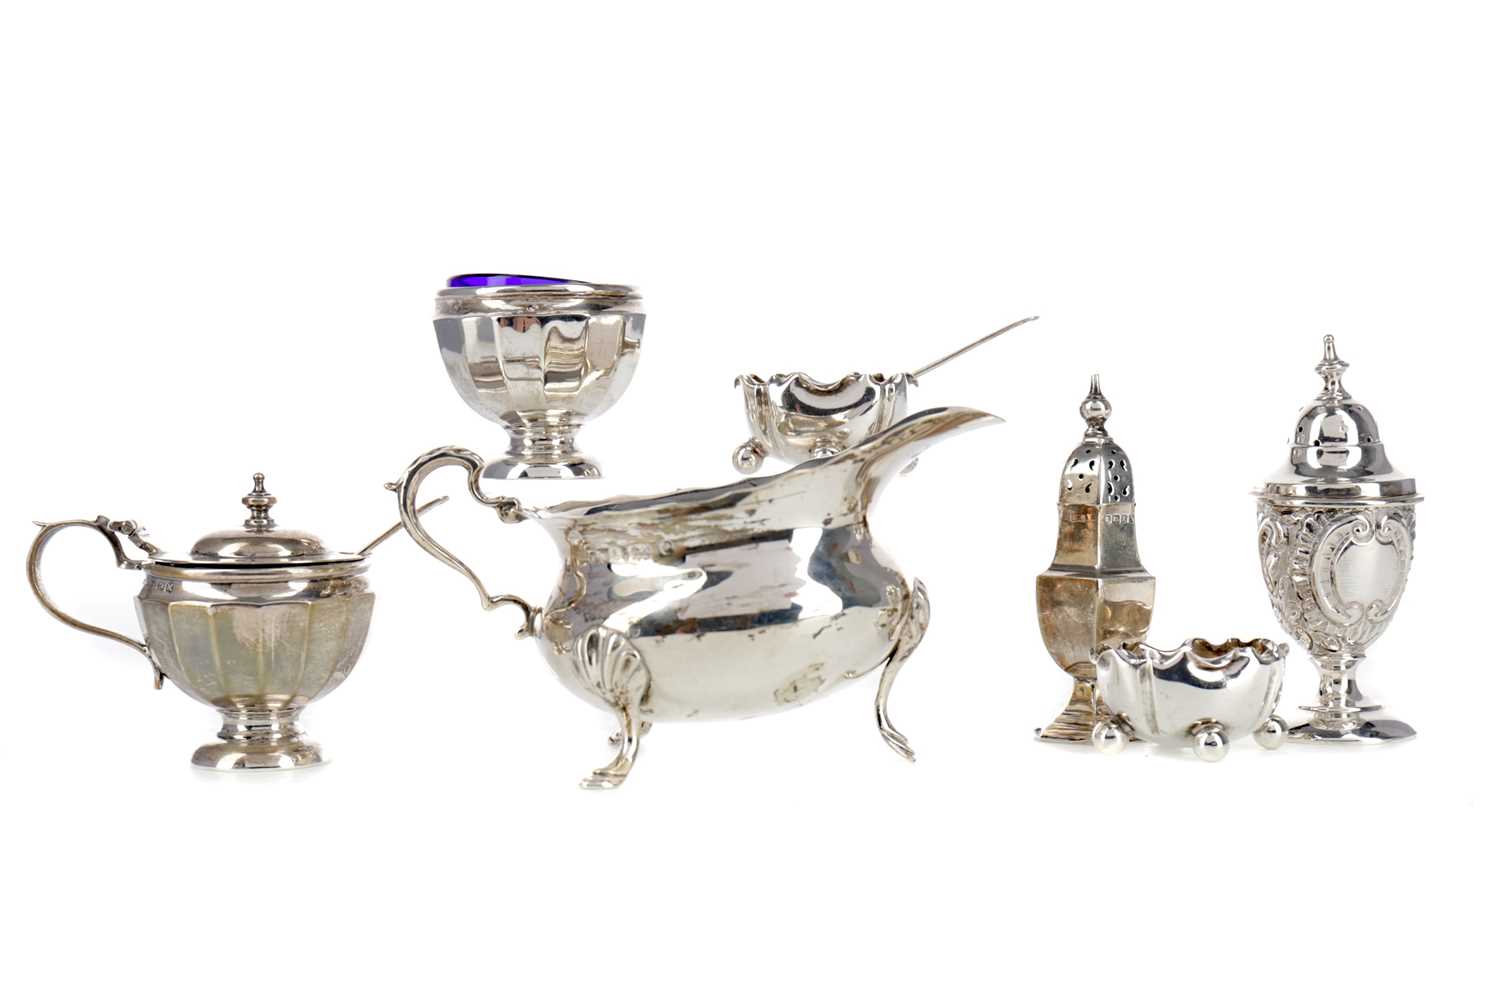 Lot 438 - AN EDWARDIAN SILVER CREAM JUG ALONG WITH CONDIMENTS